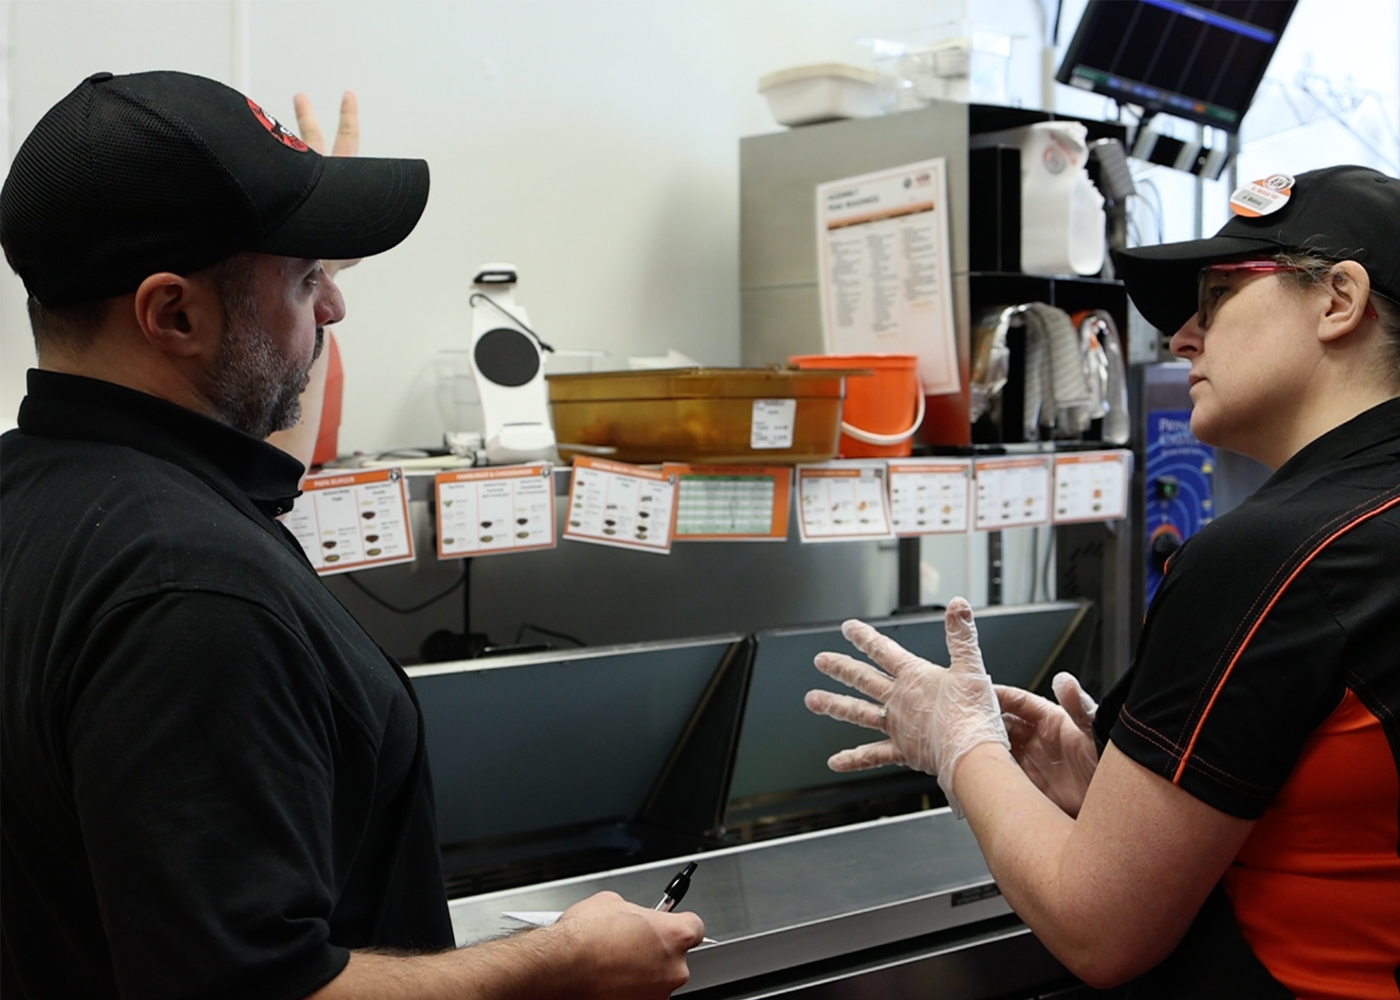 Trainer Paul talking to AWU Attendee in the A&W Test Kitchen